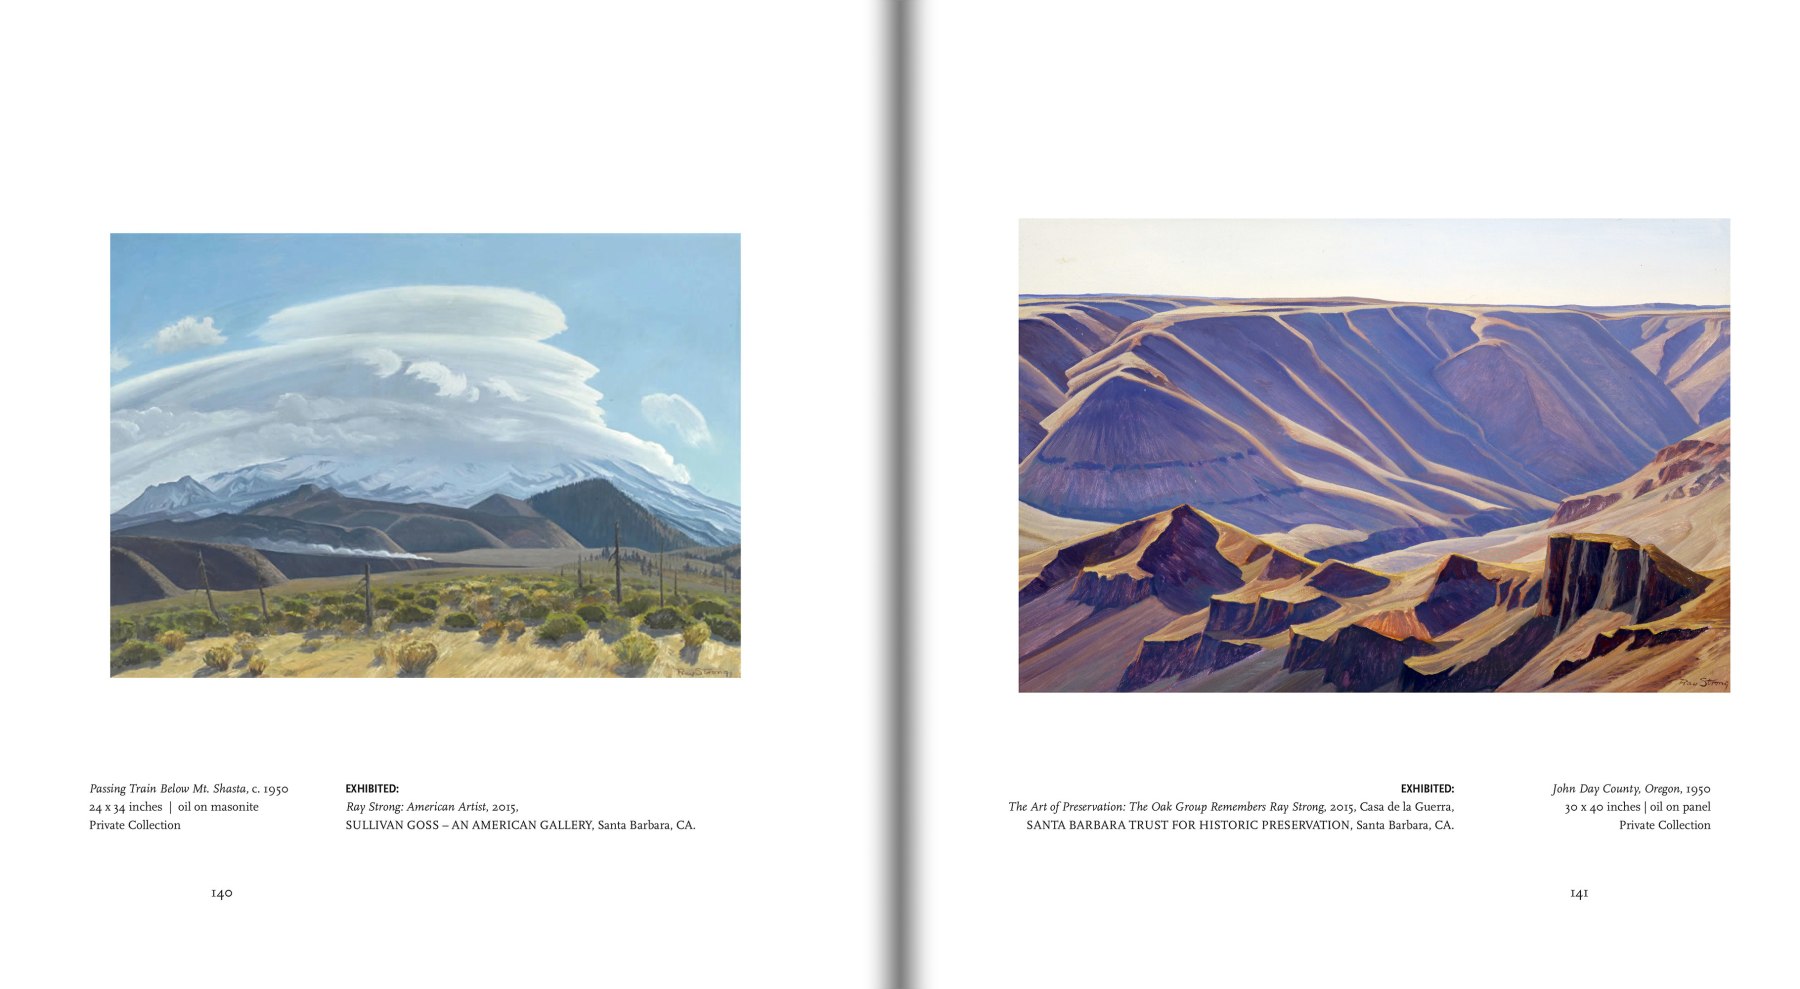 Pages 140 and 141 of RAY STRONG: American Artist, featuring &quot;Passing Train Below Mt. Shasta&quot;, c. 1950 and &quot;John Day County, Oregon&quot;, 1950